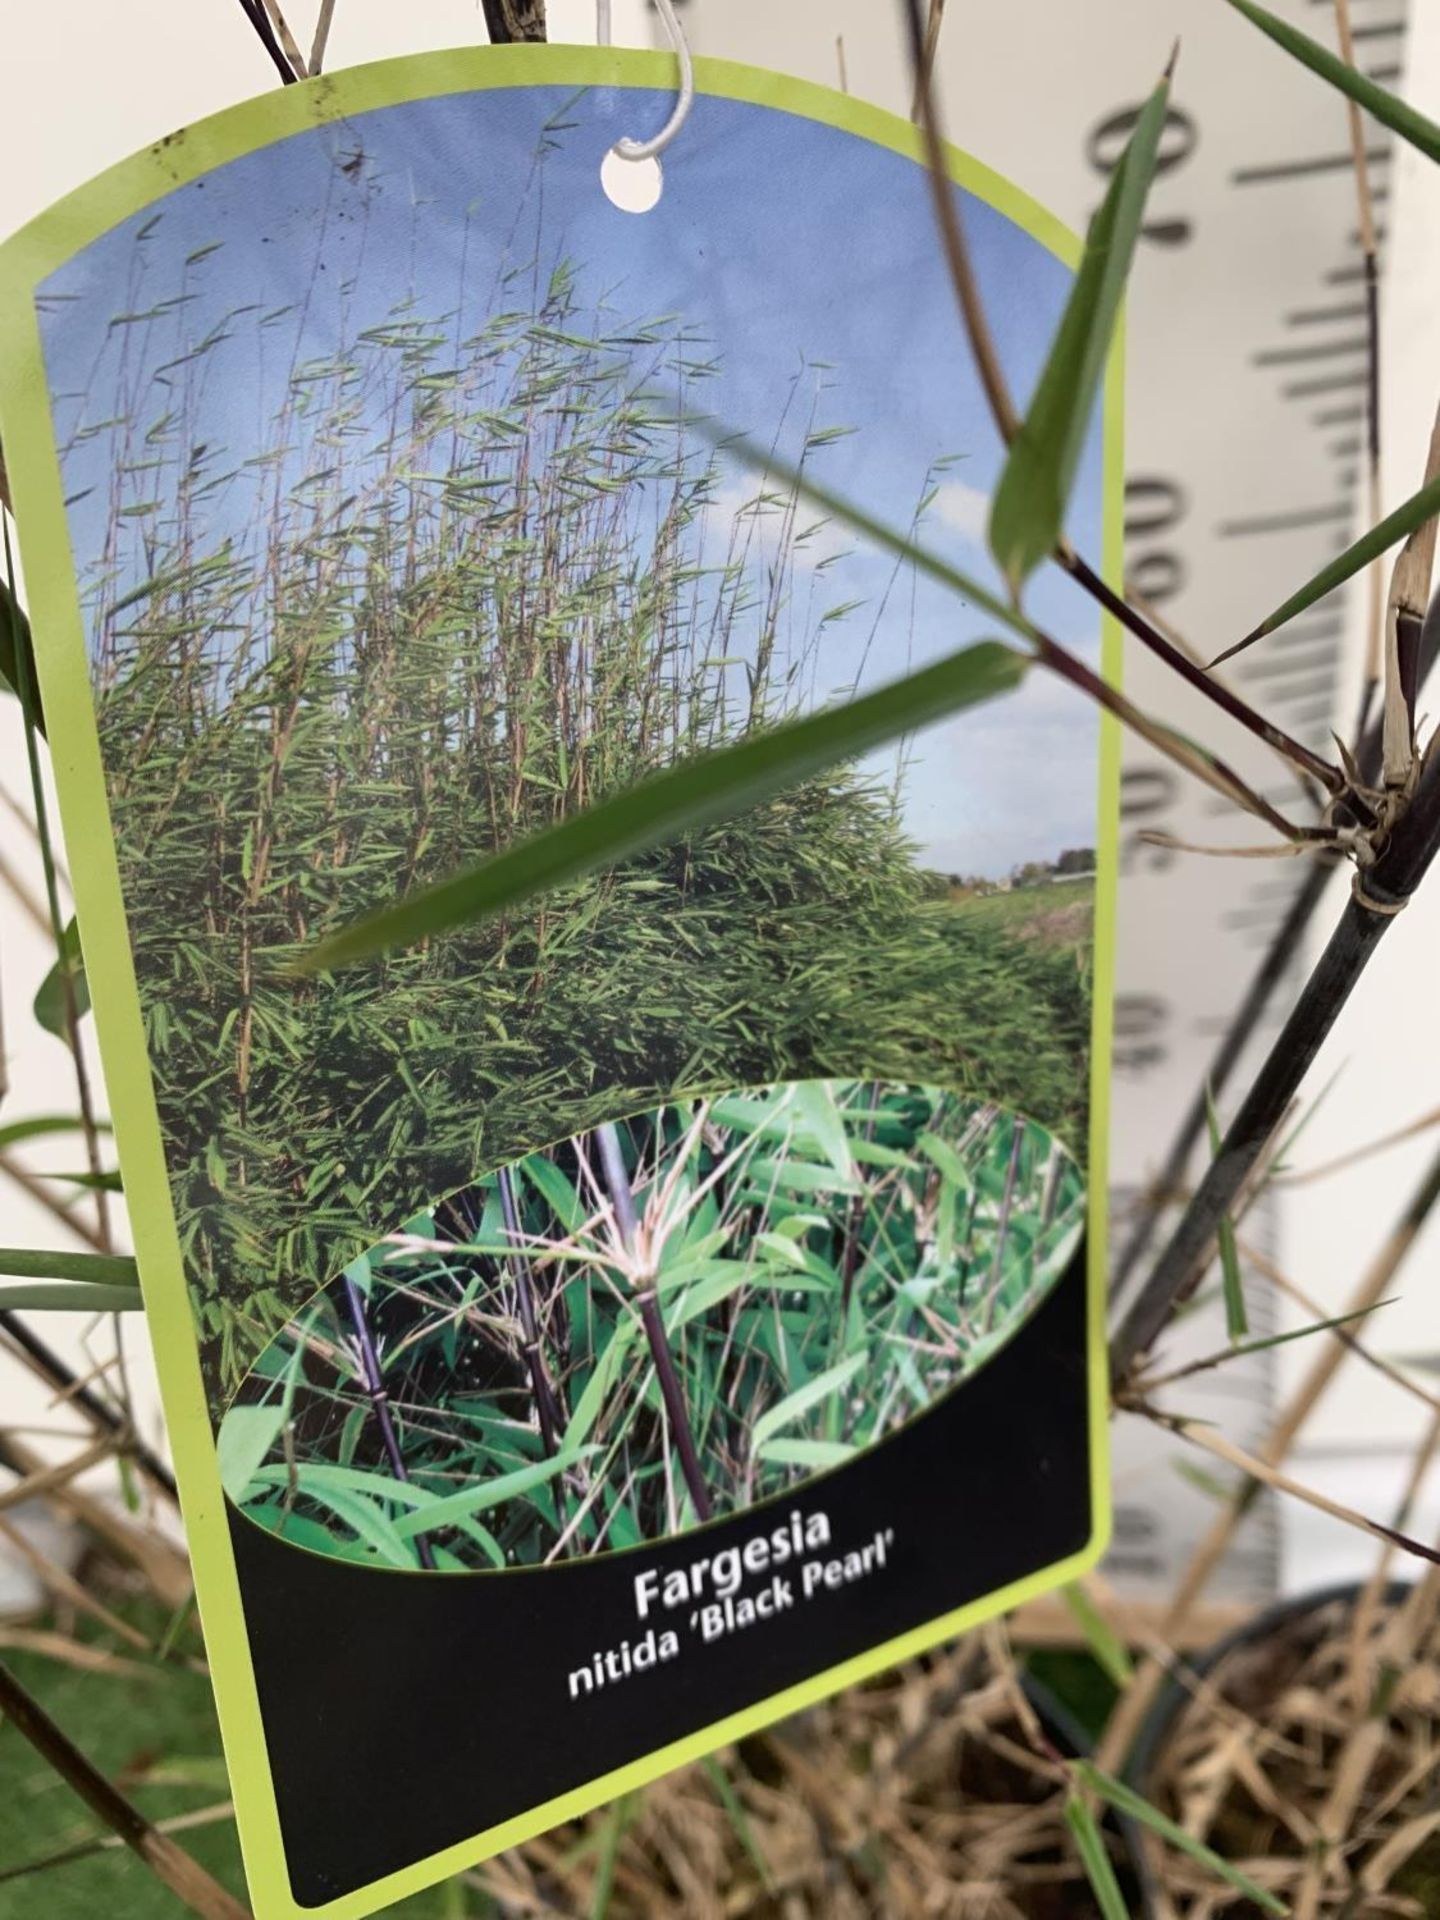 TWO BAMBOO FARGESIA NITIDA 'BLACK PEARL' APPROX 190CM IN HEIGHT IN 5 LTR POTS PLUS VAT TO BE SOLD - Image 10 of 10